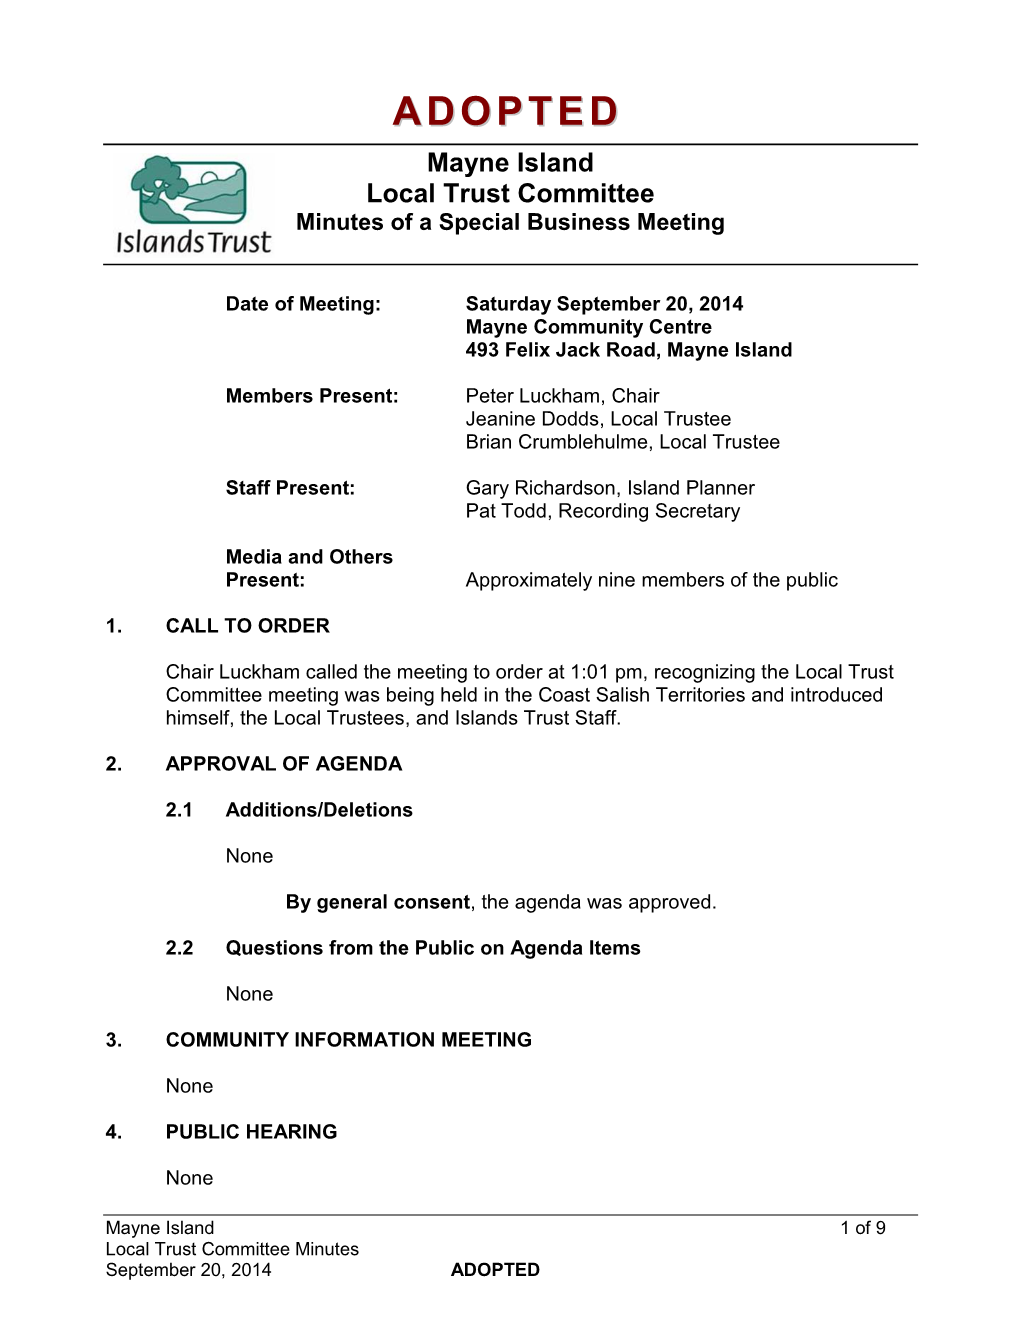 ADOPTED Mayne Island Local Trust Committee Minutes of a Special Business Meeting